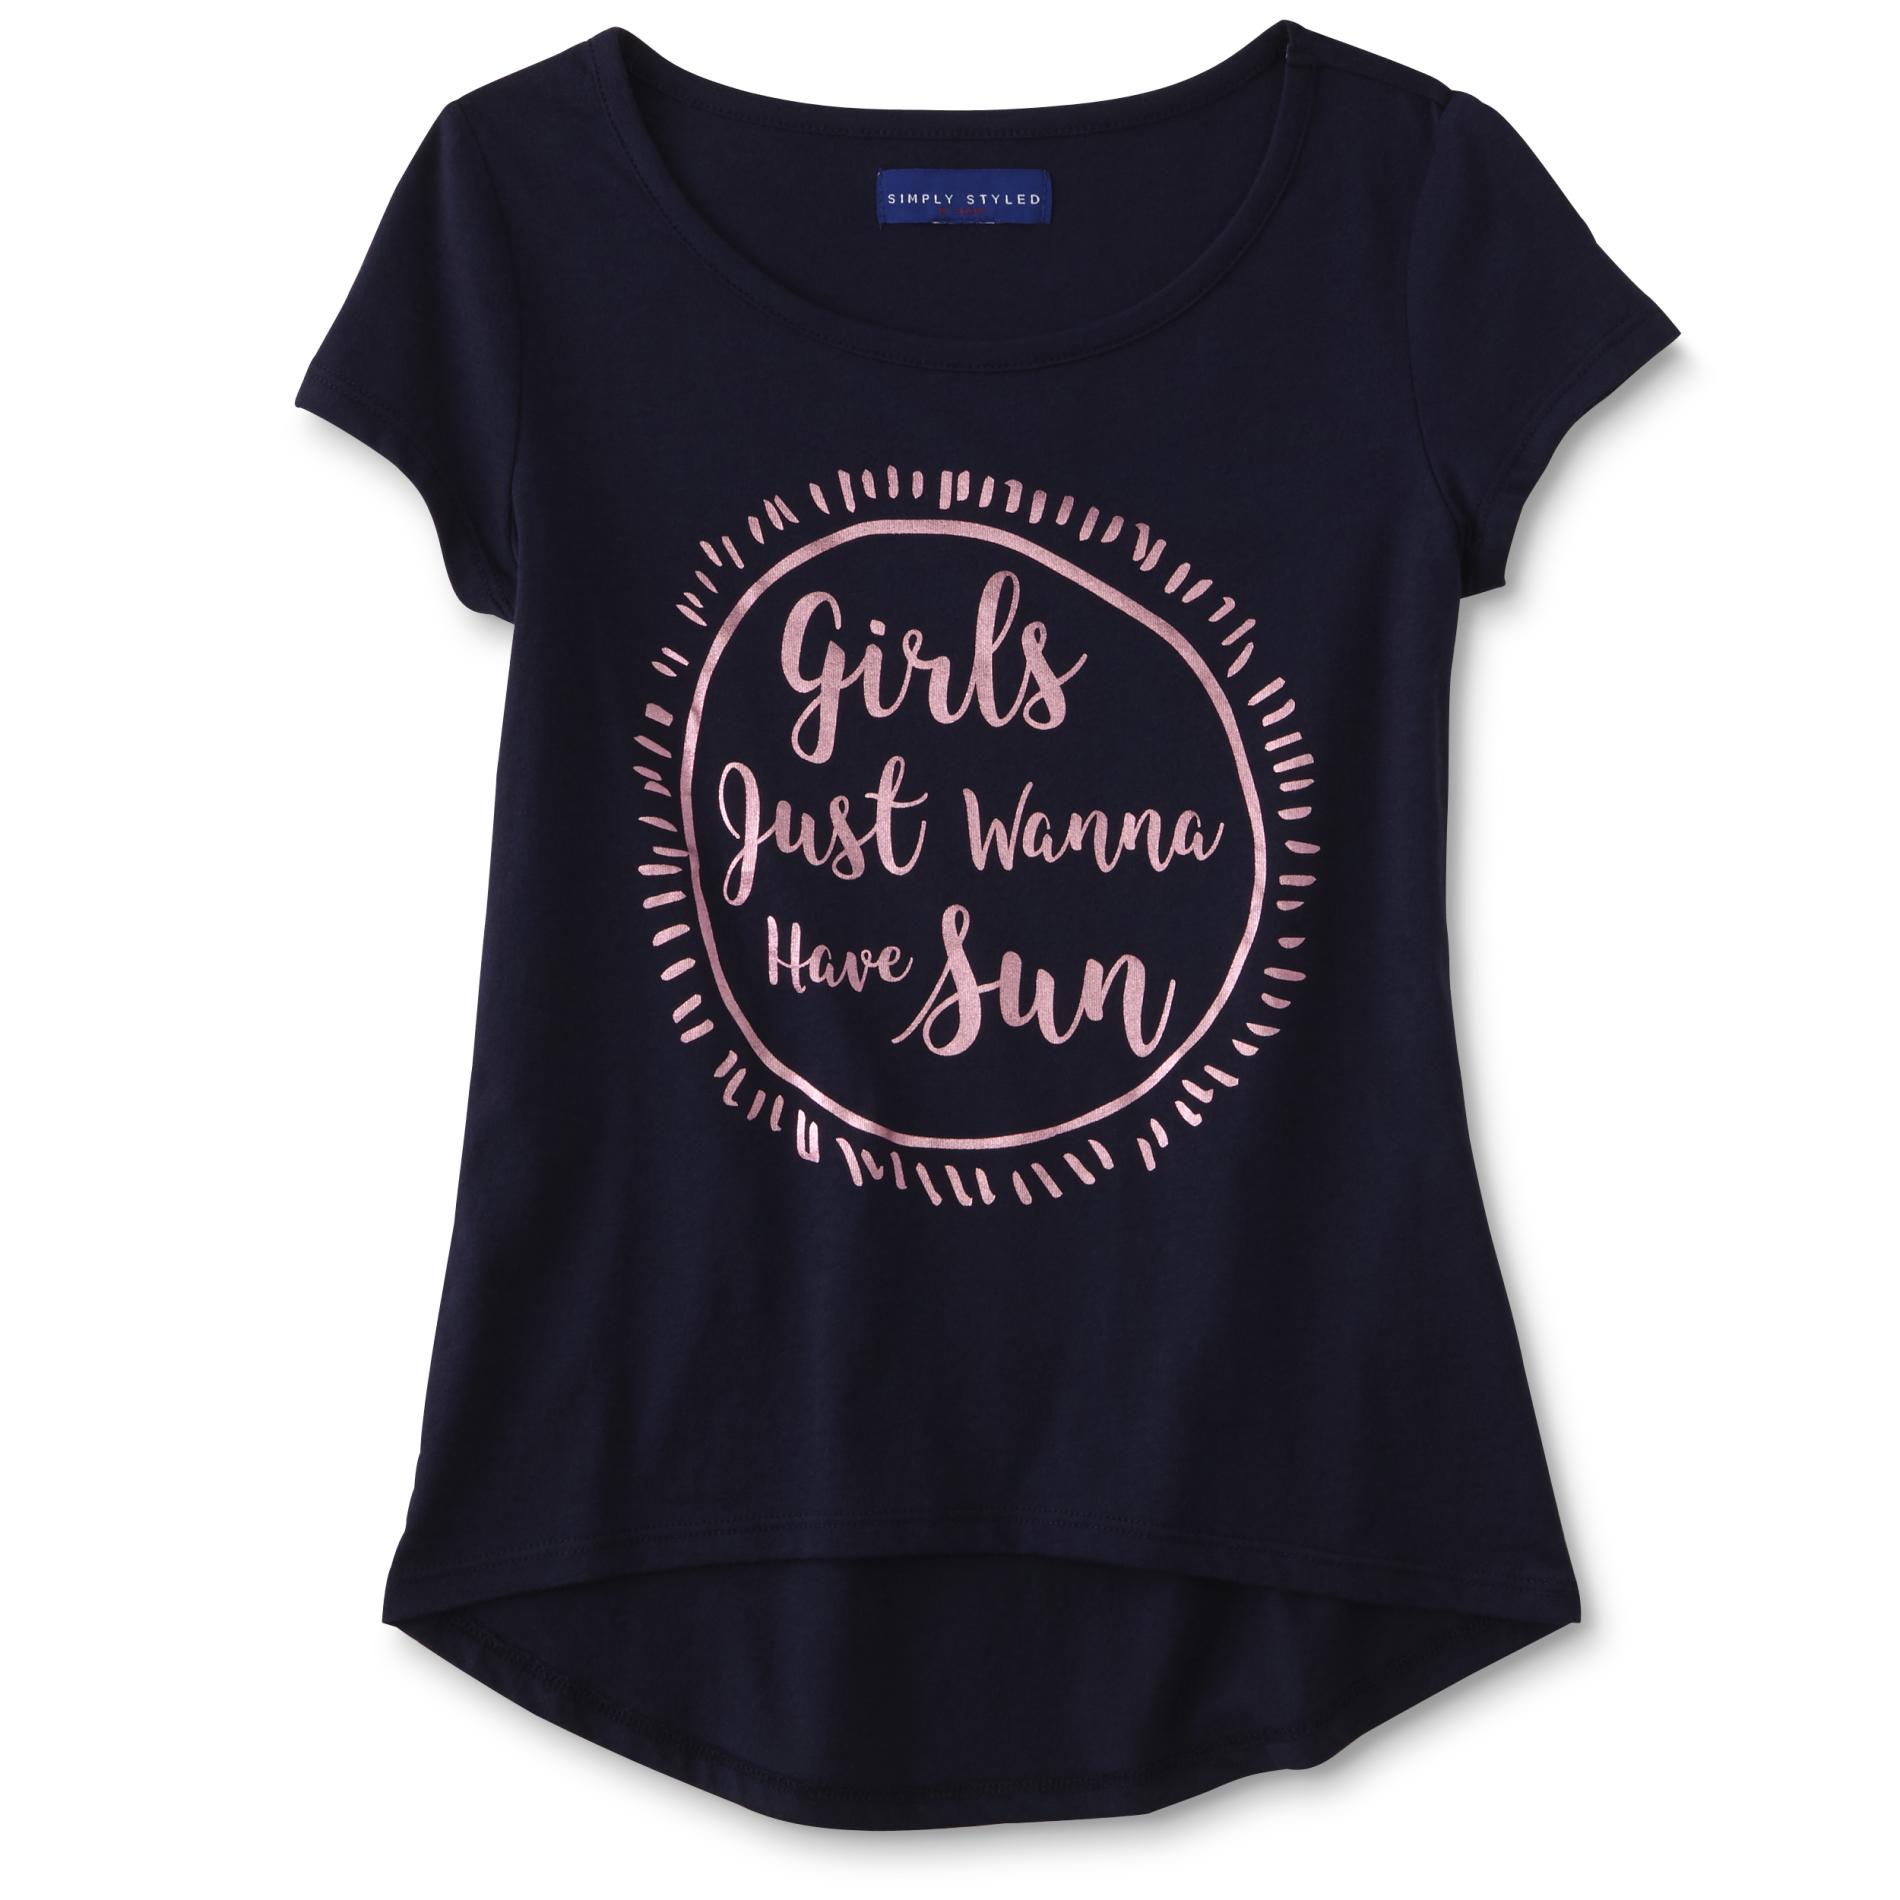 Simply Styled Girls' Graphic T-Shirt - Girls Just Wanna Have Fun